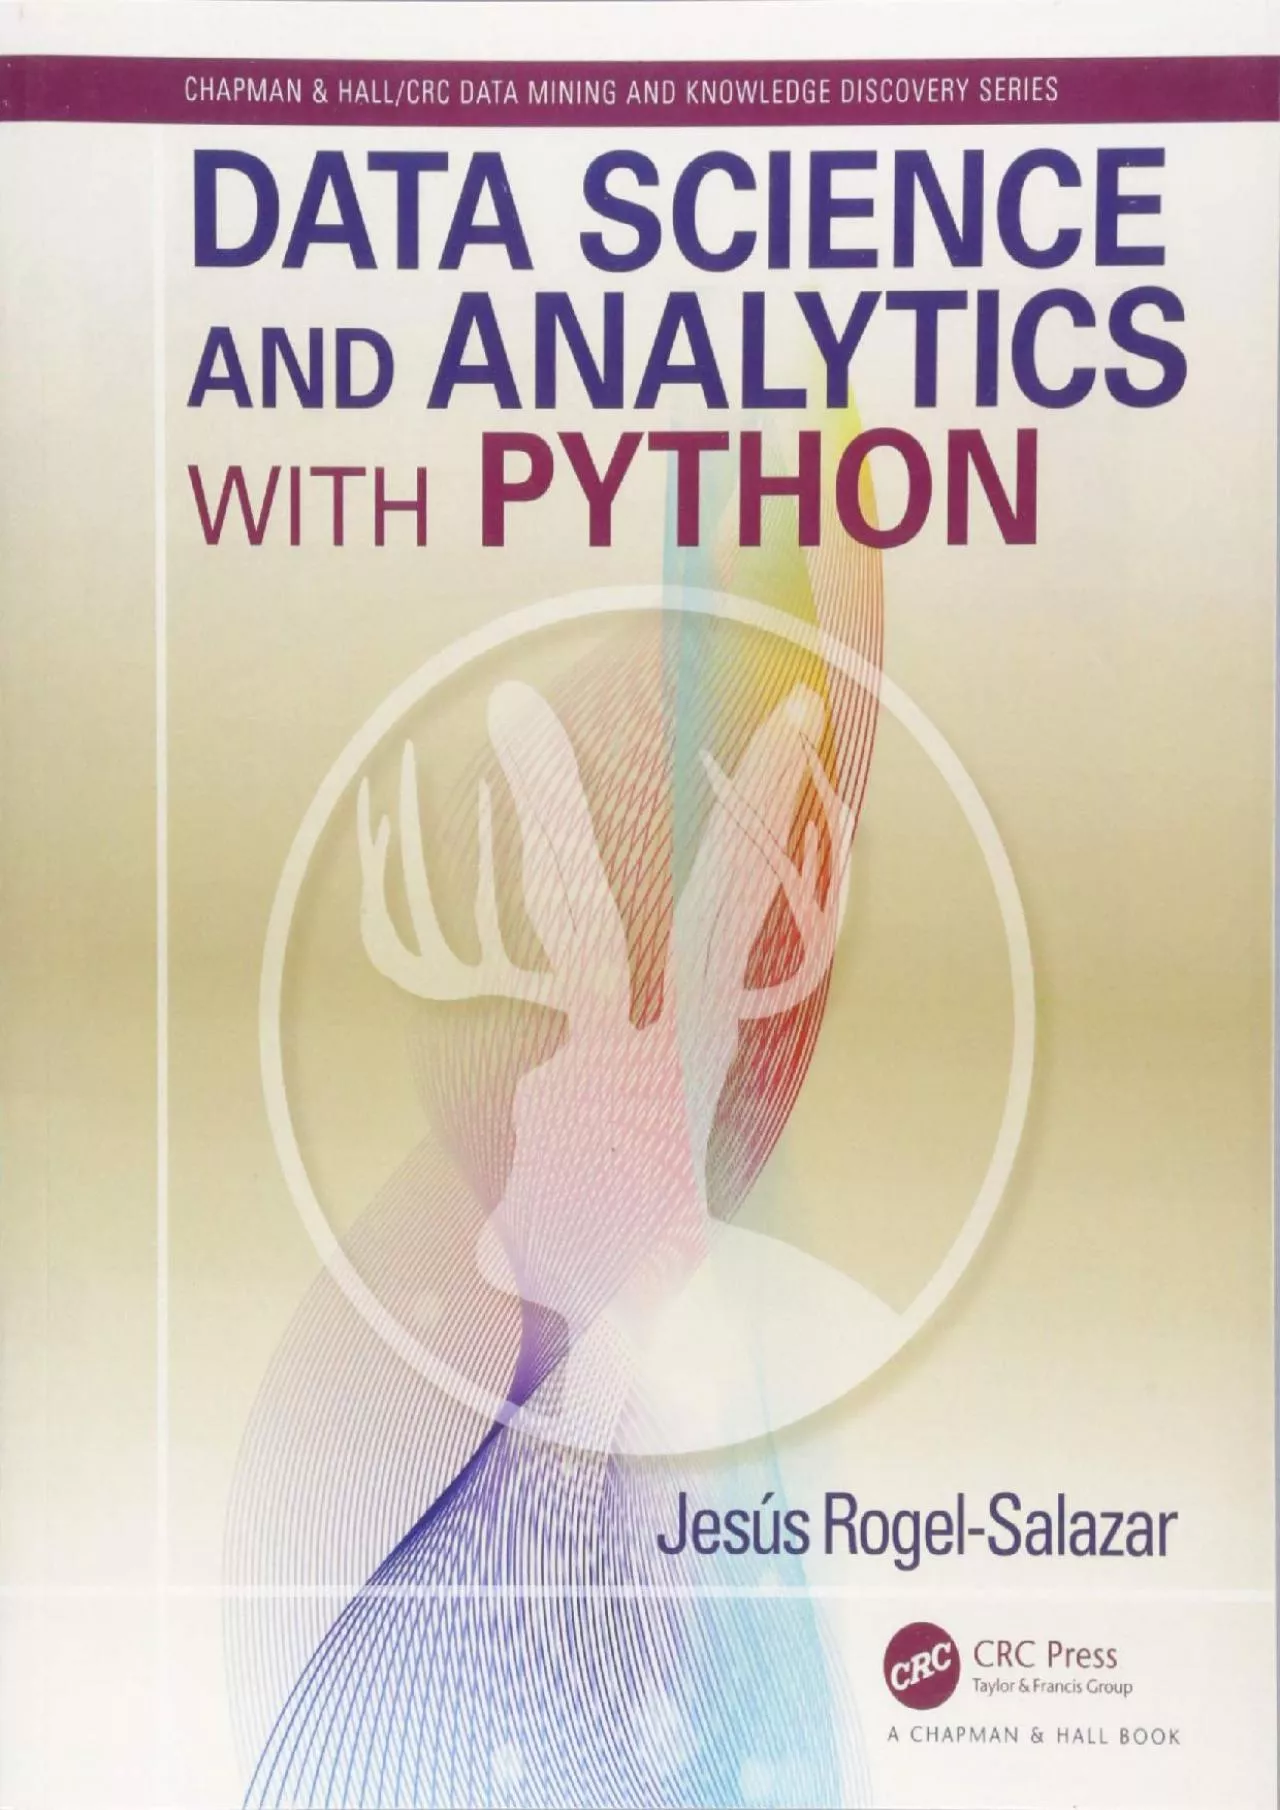 [FREE]-Data Science and Analytics with Python (Chapman & HallCRC Data Mining and Knowledge